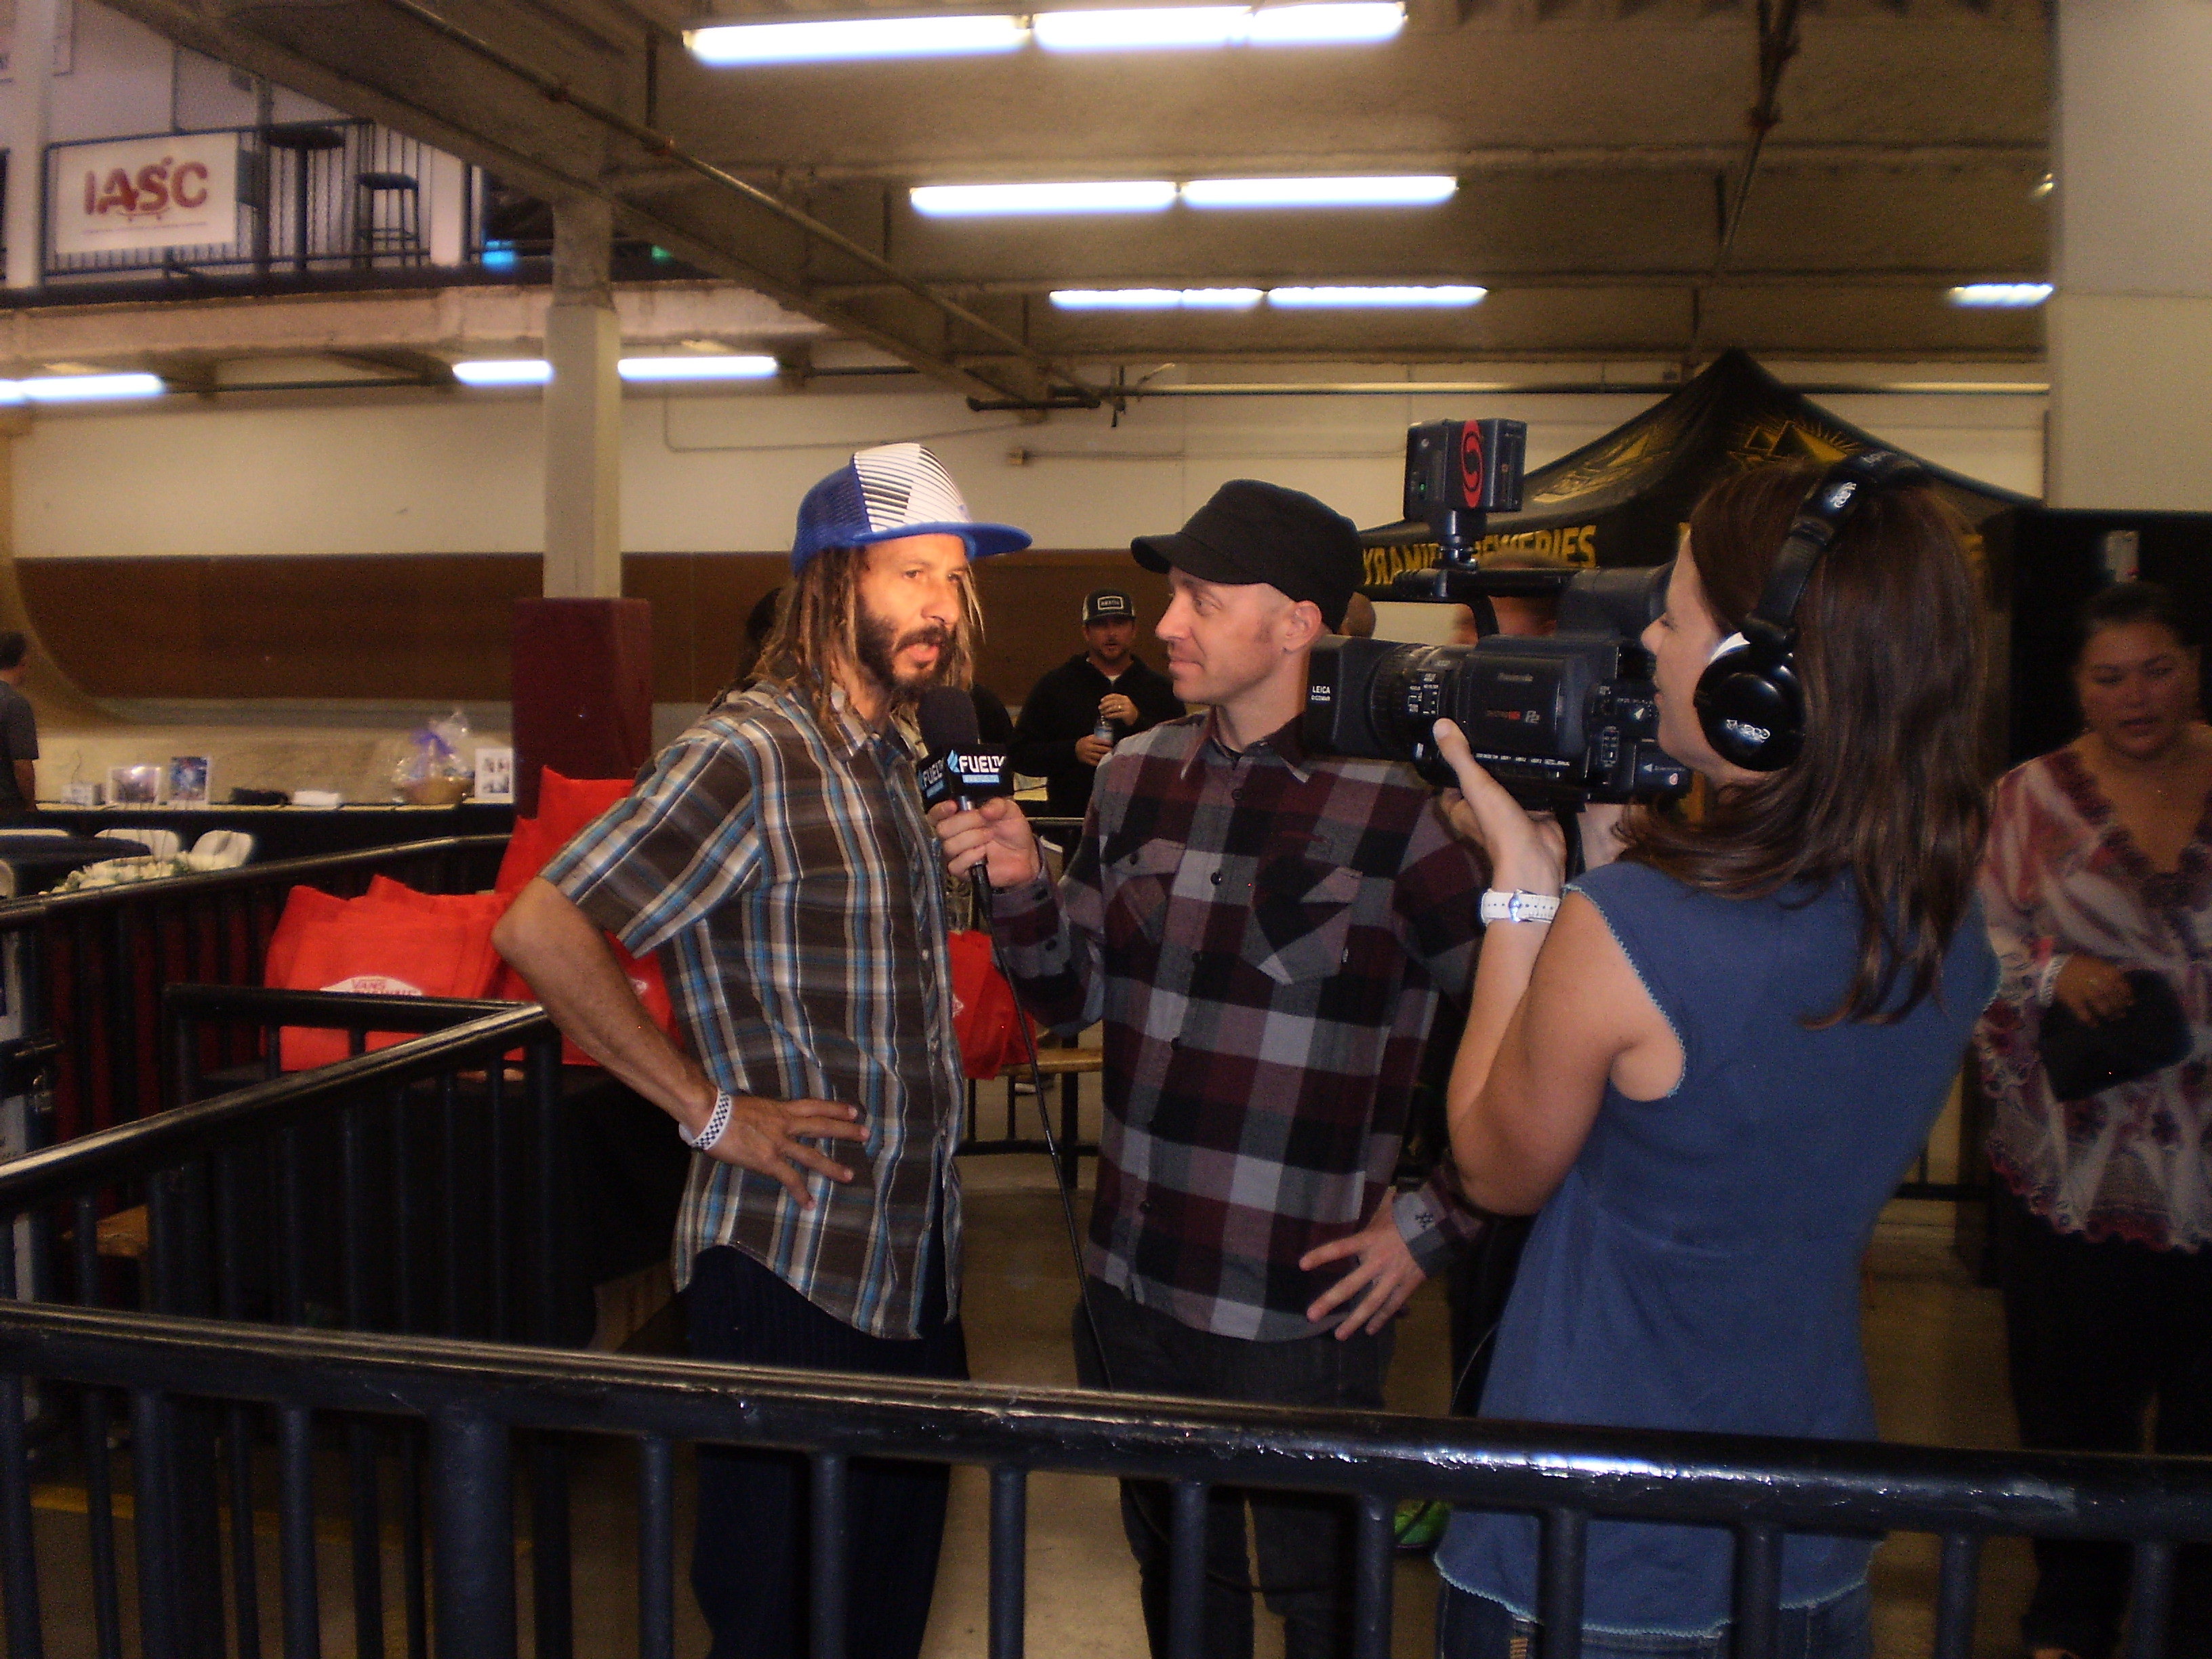 TA interviewed by Neal Hendrix for Fuel TV